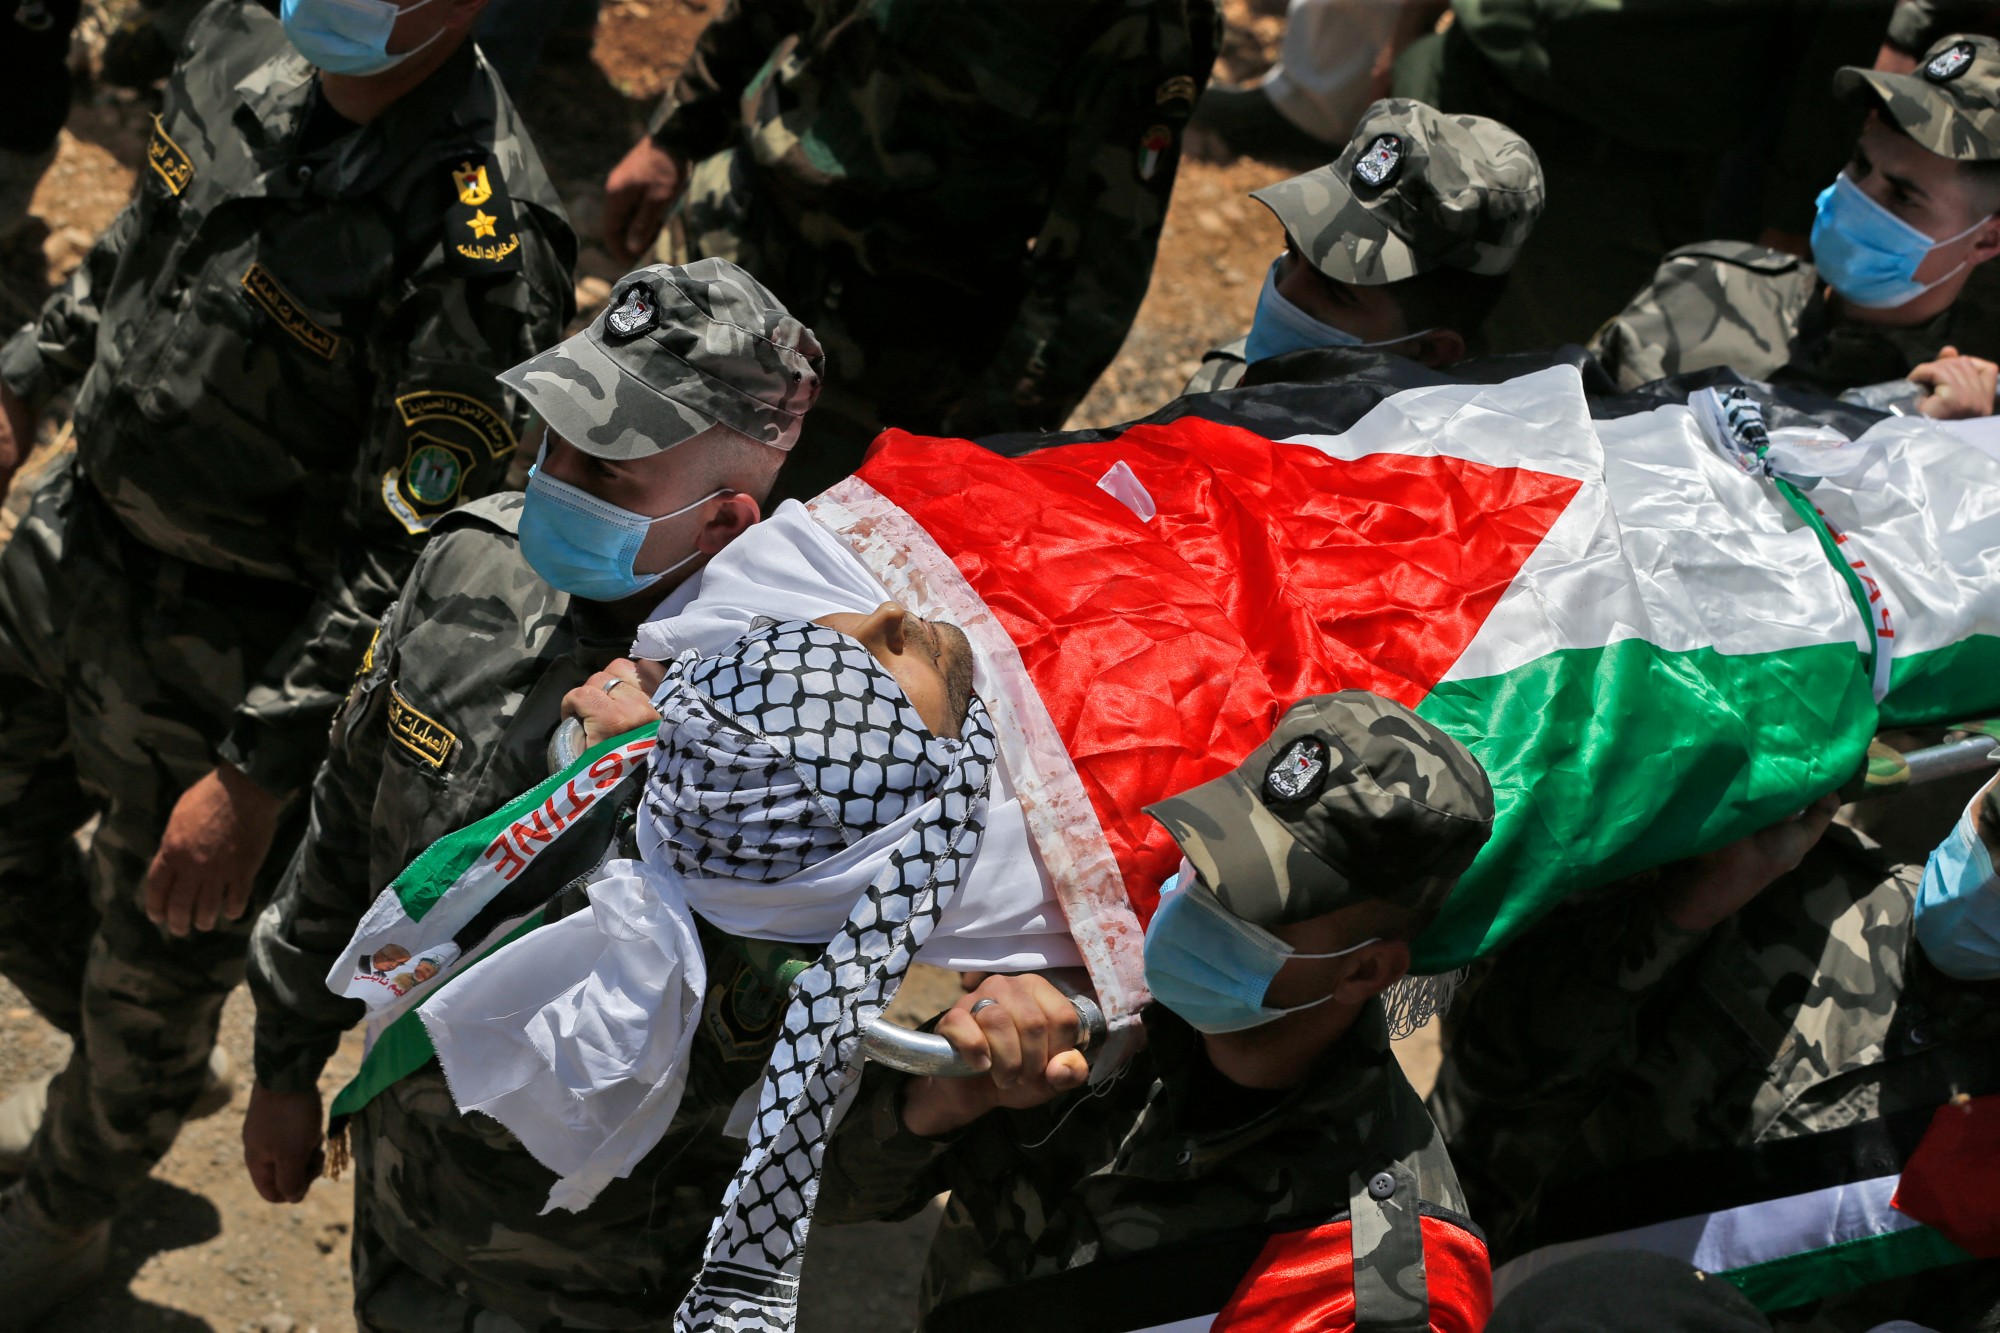 Palestinian special operations officers carry the body of Ahmed Daraghmeh, 30, who was killed by Israeli forces the previous day, during his funeral in the northern West Bank on 12 May 2021 (AFP)